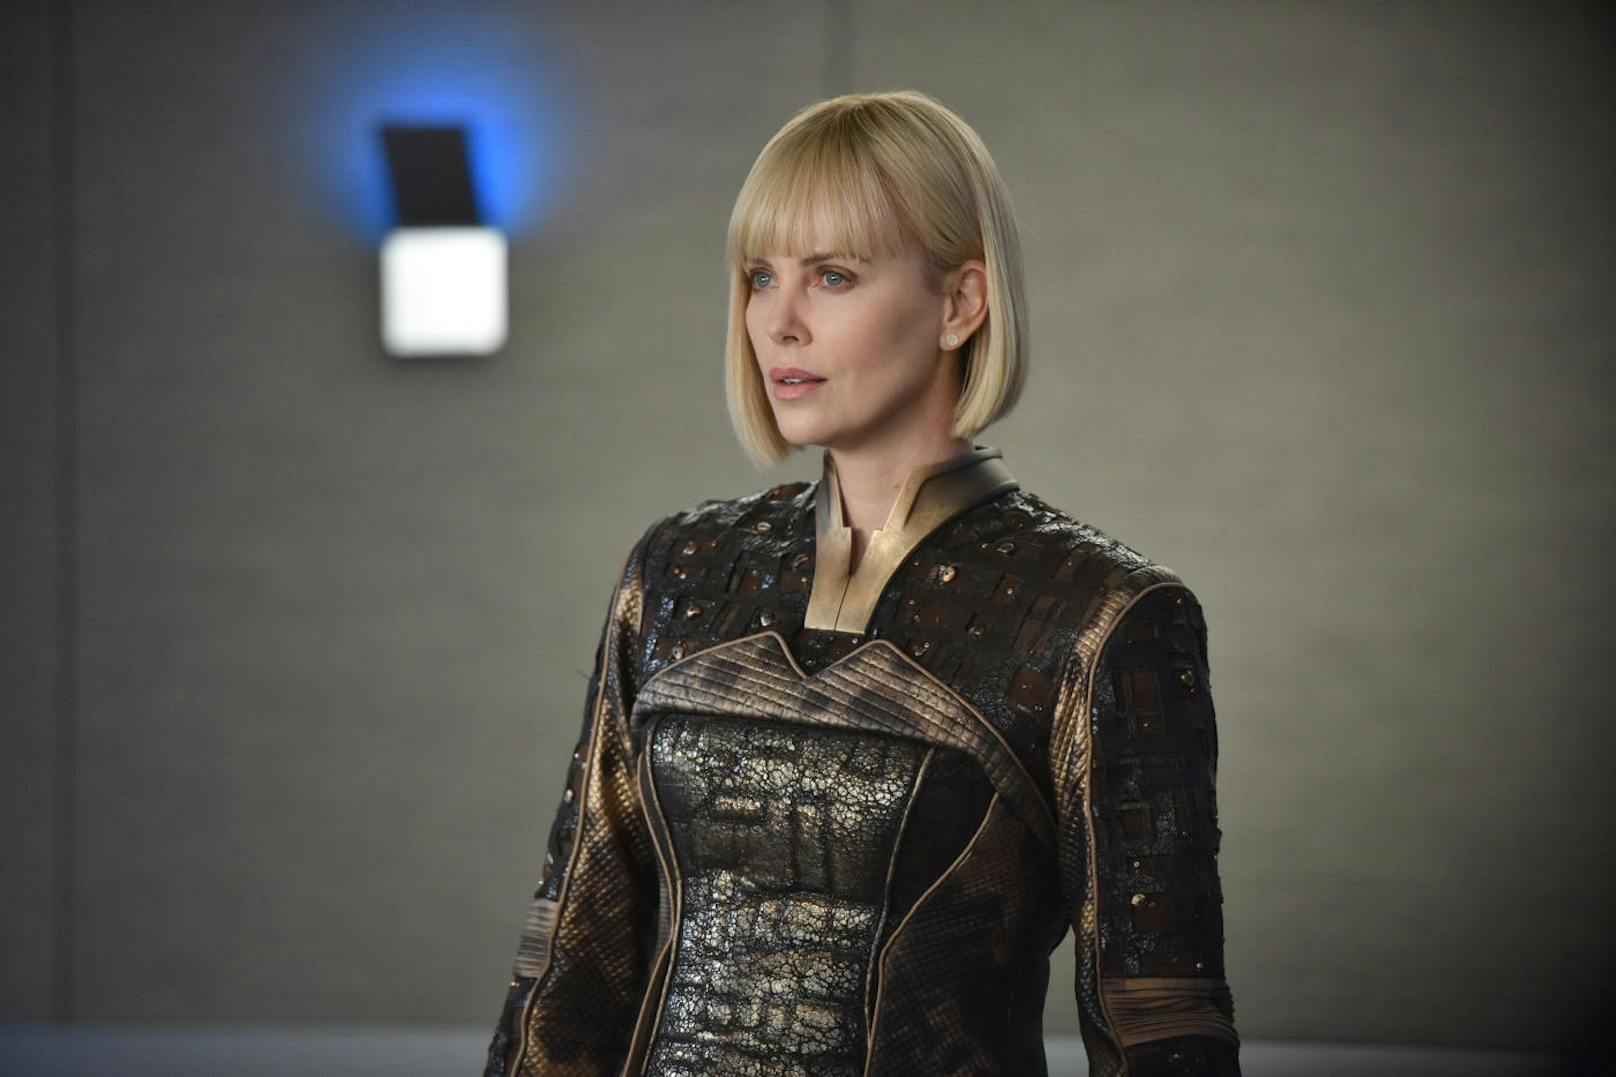 Charlize Theron in "The Orville"